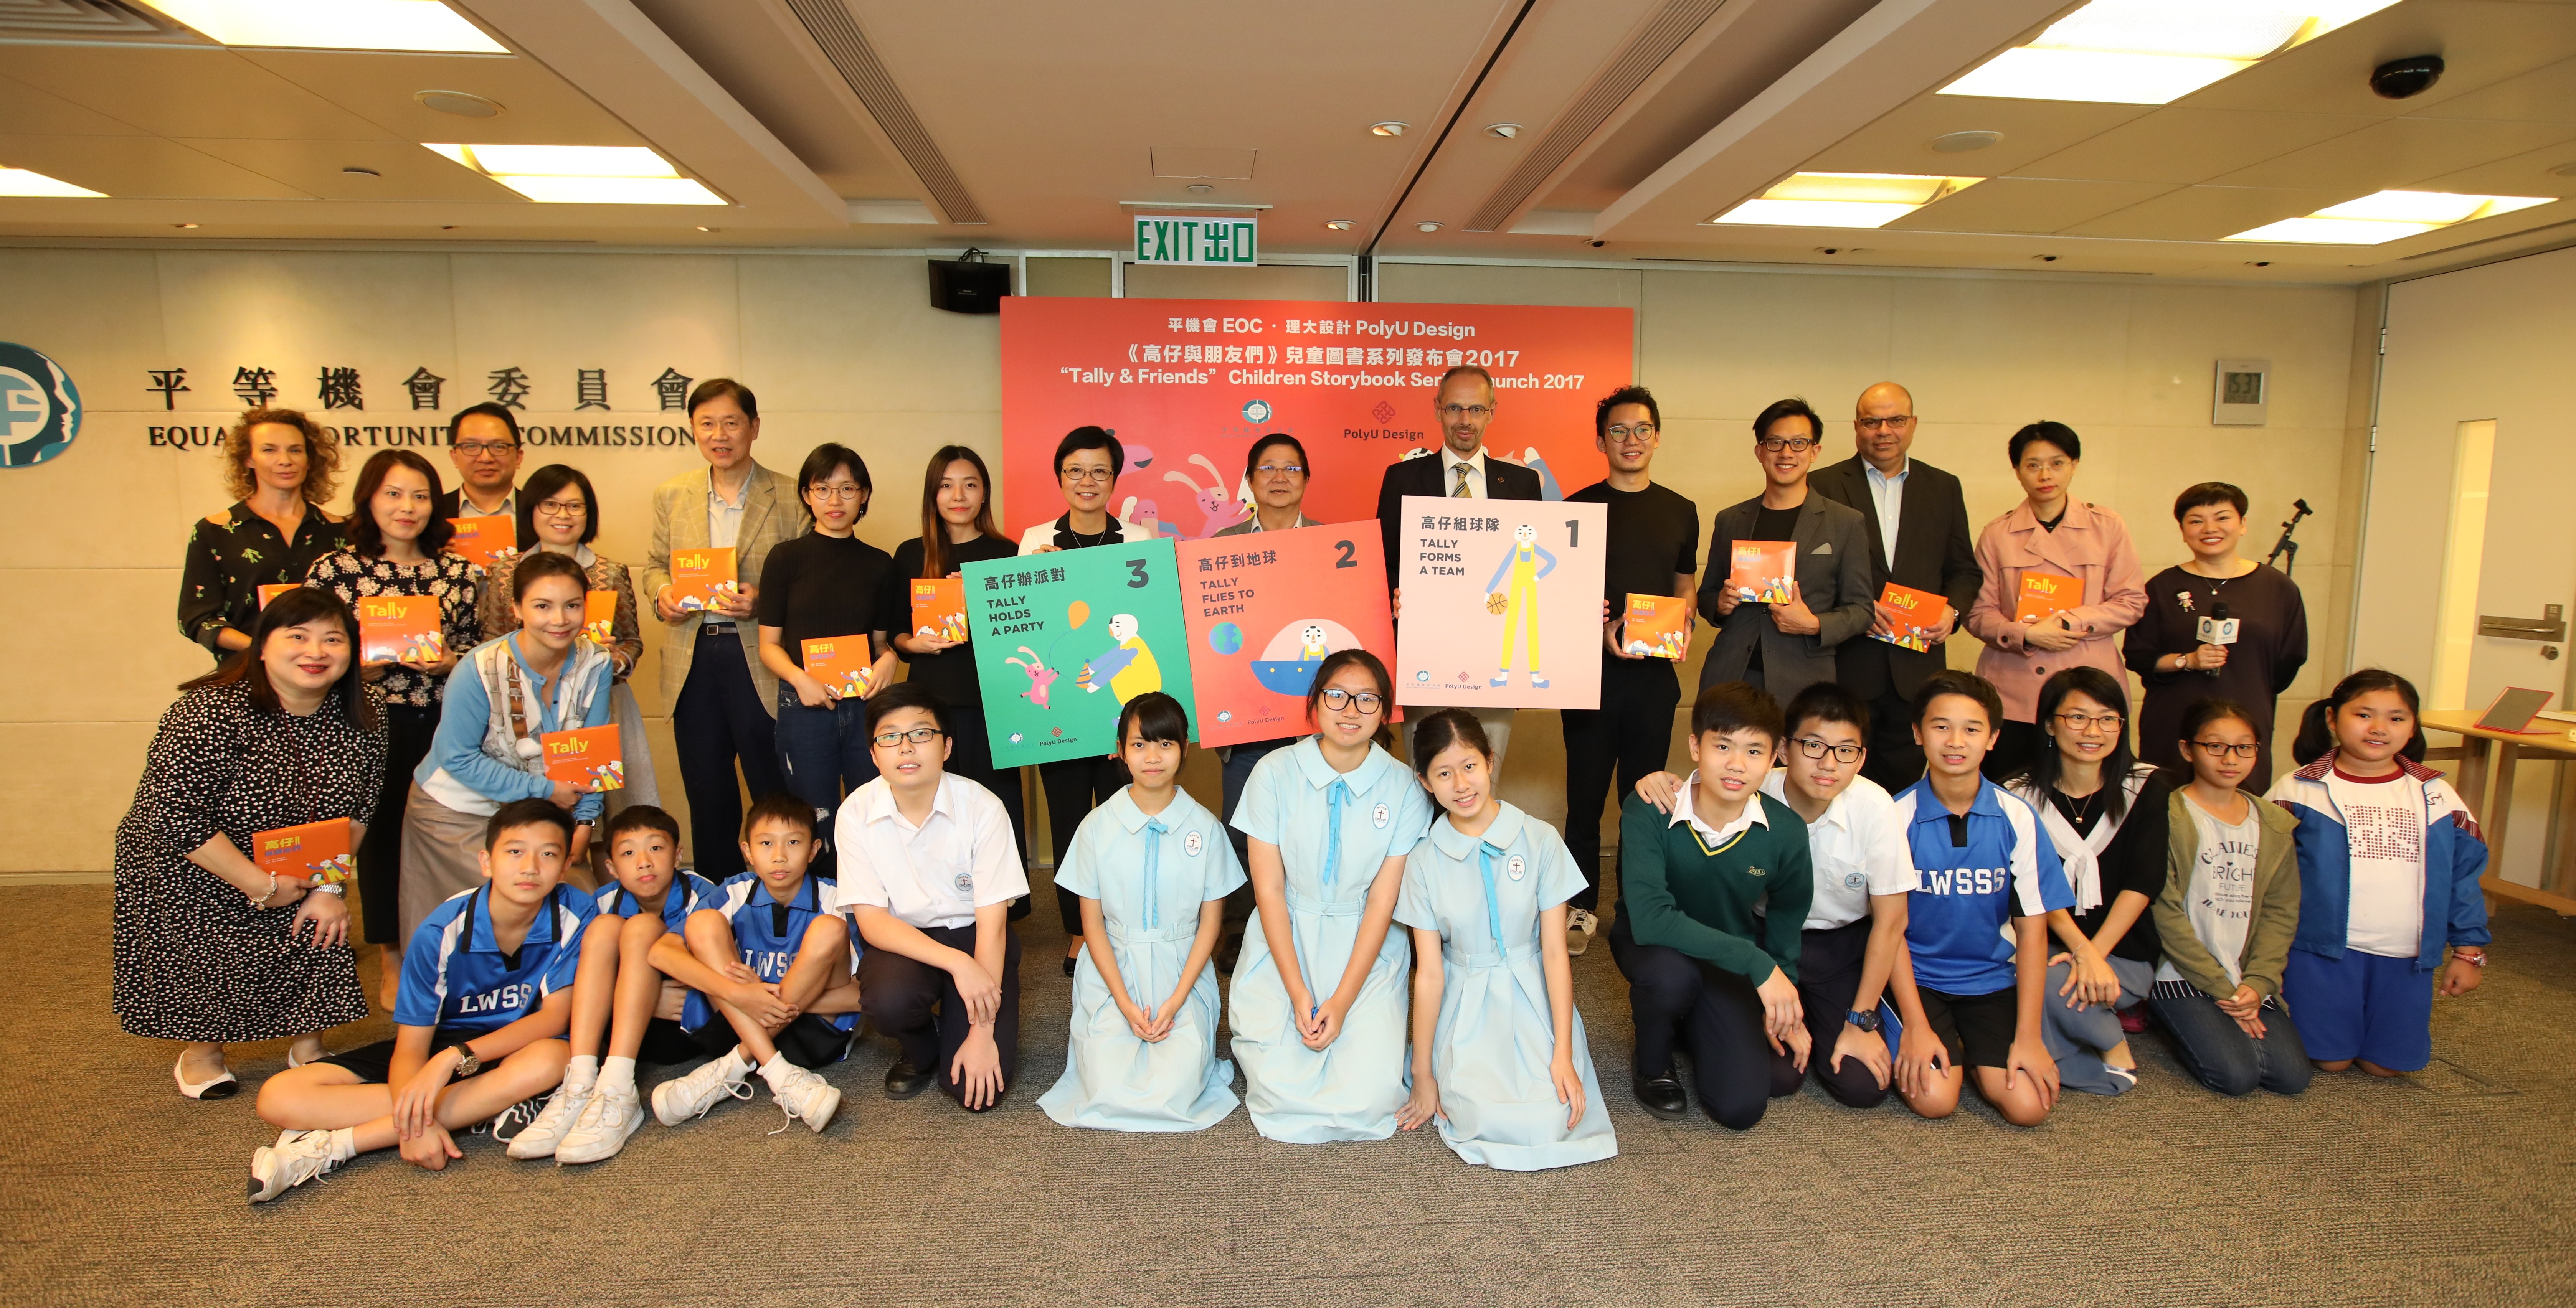 Group photo at the launch of the "Tally and Friends" storybook series 